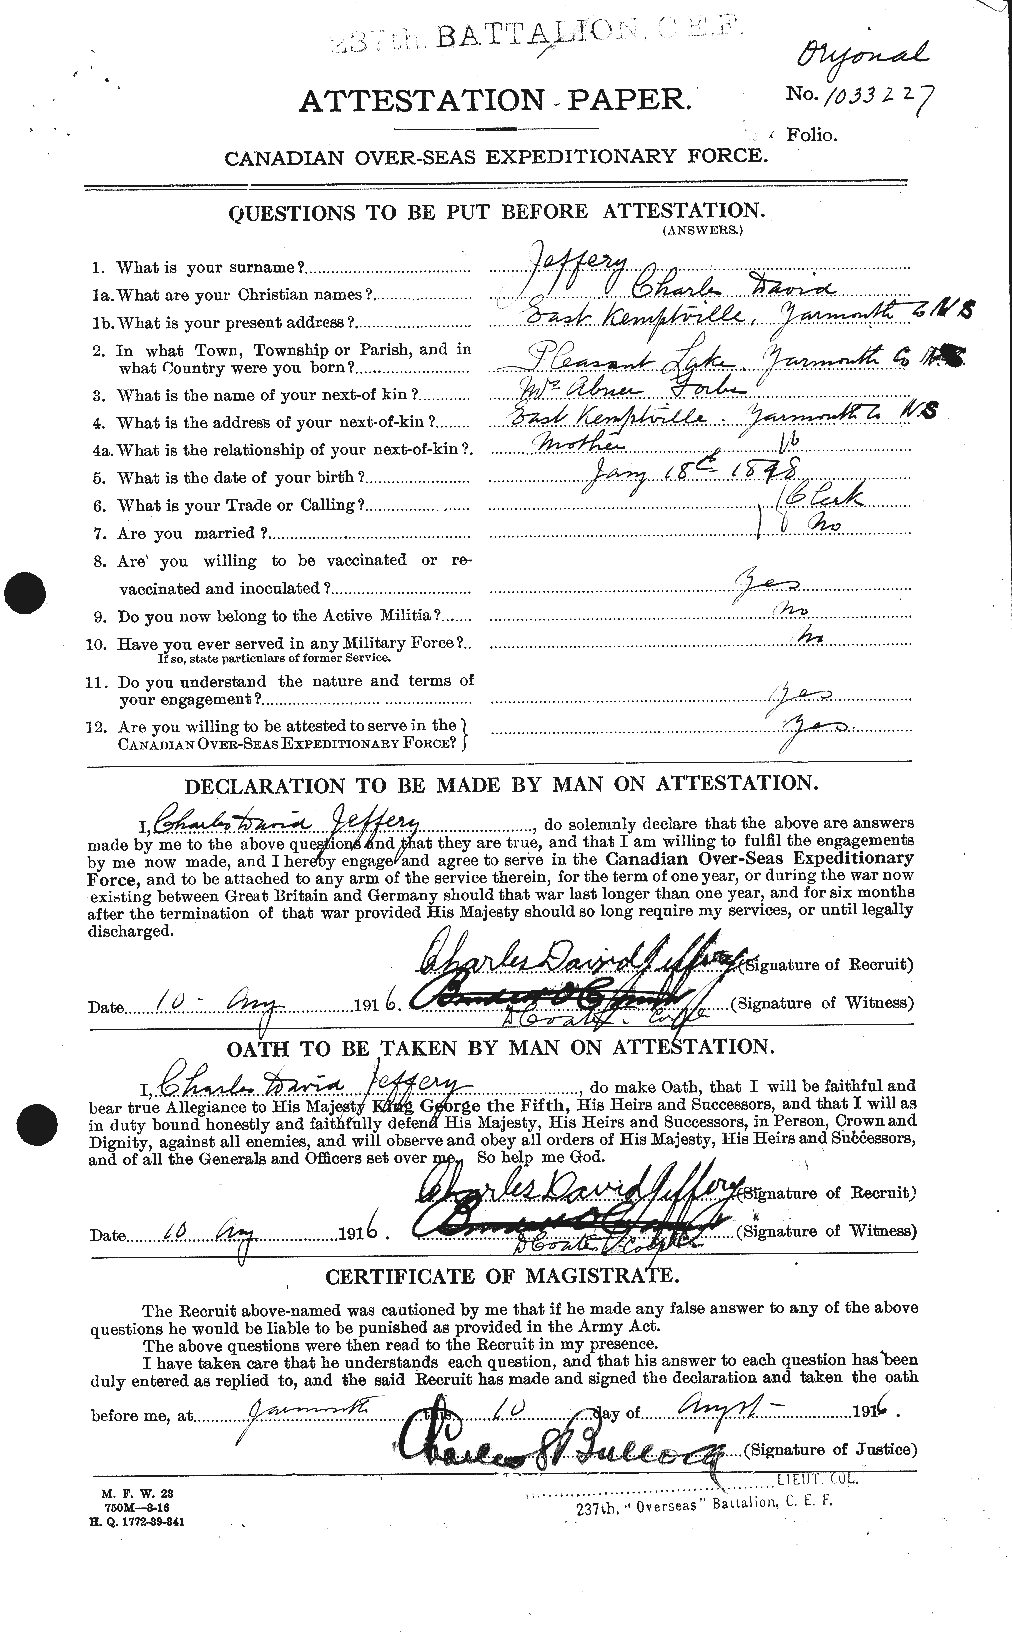 Personnel Records of the First World War - CEF 417719a